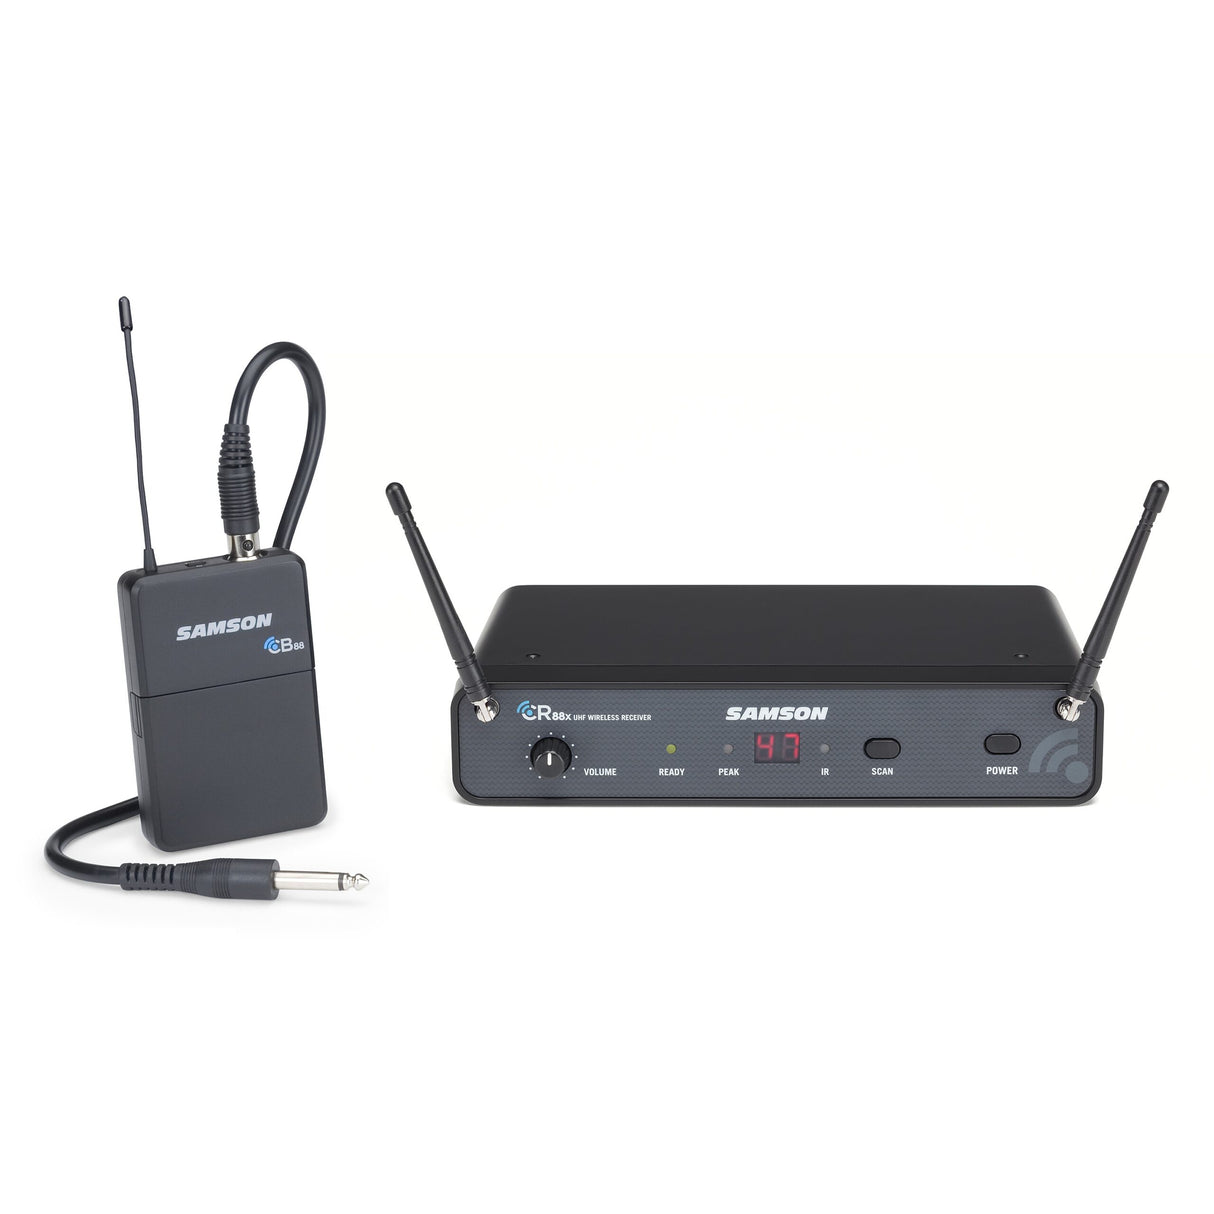 Samson SWC88XBGT-K Concert 88x Wireless Guitar System with GC32 Instrument Cable, K Band